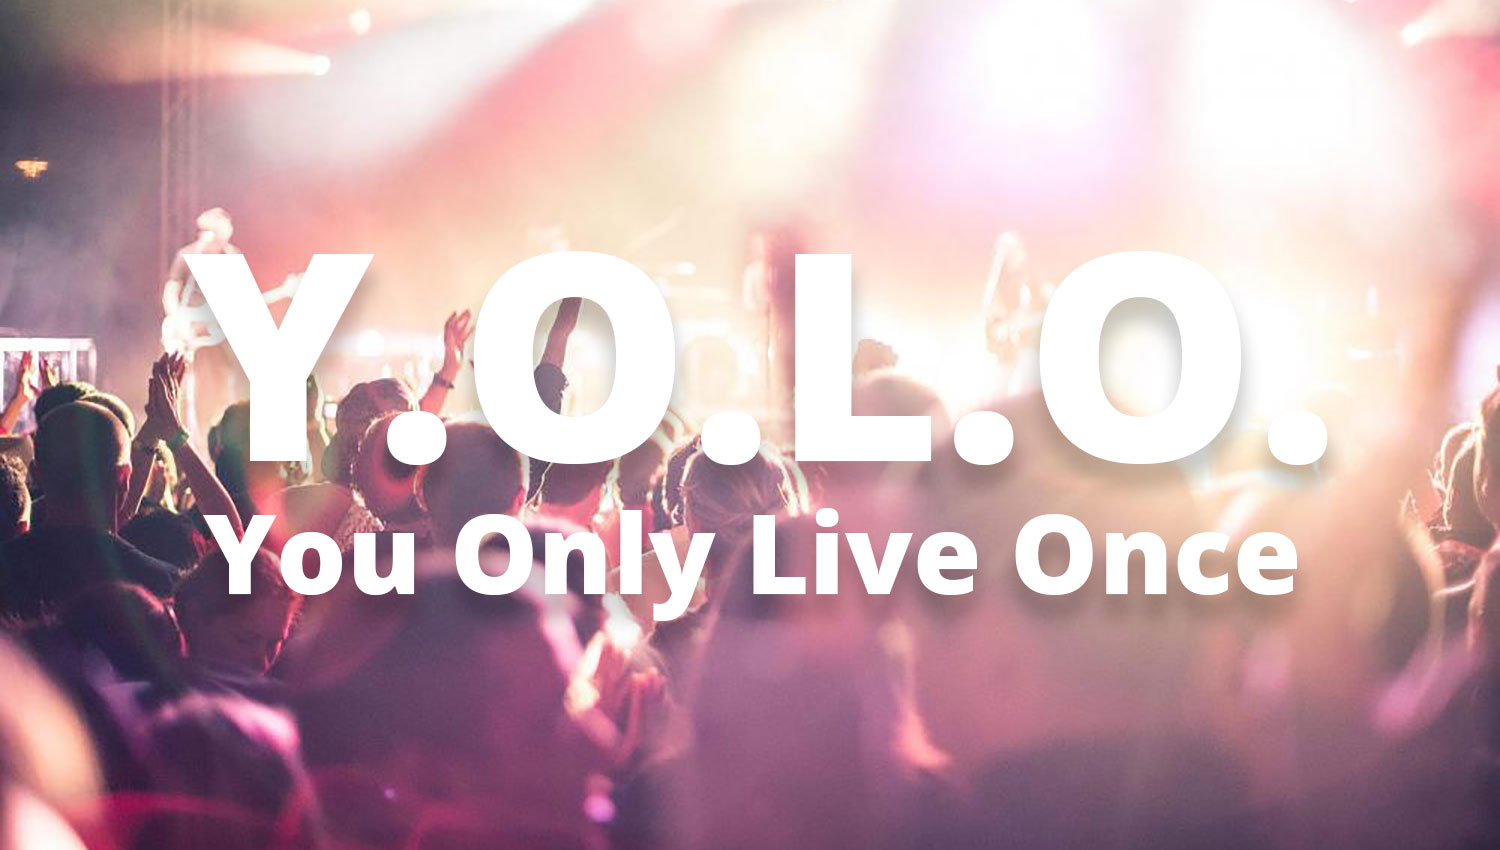 Do once best. Yolo: you only Live once выставка. VR-инсталляция Yolo: you only Live once. Yolo you only Live once иллюстрация. Yolo экономика.